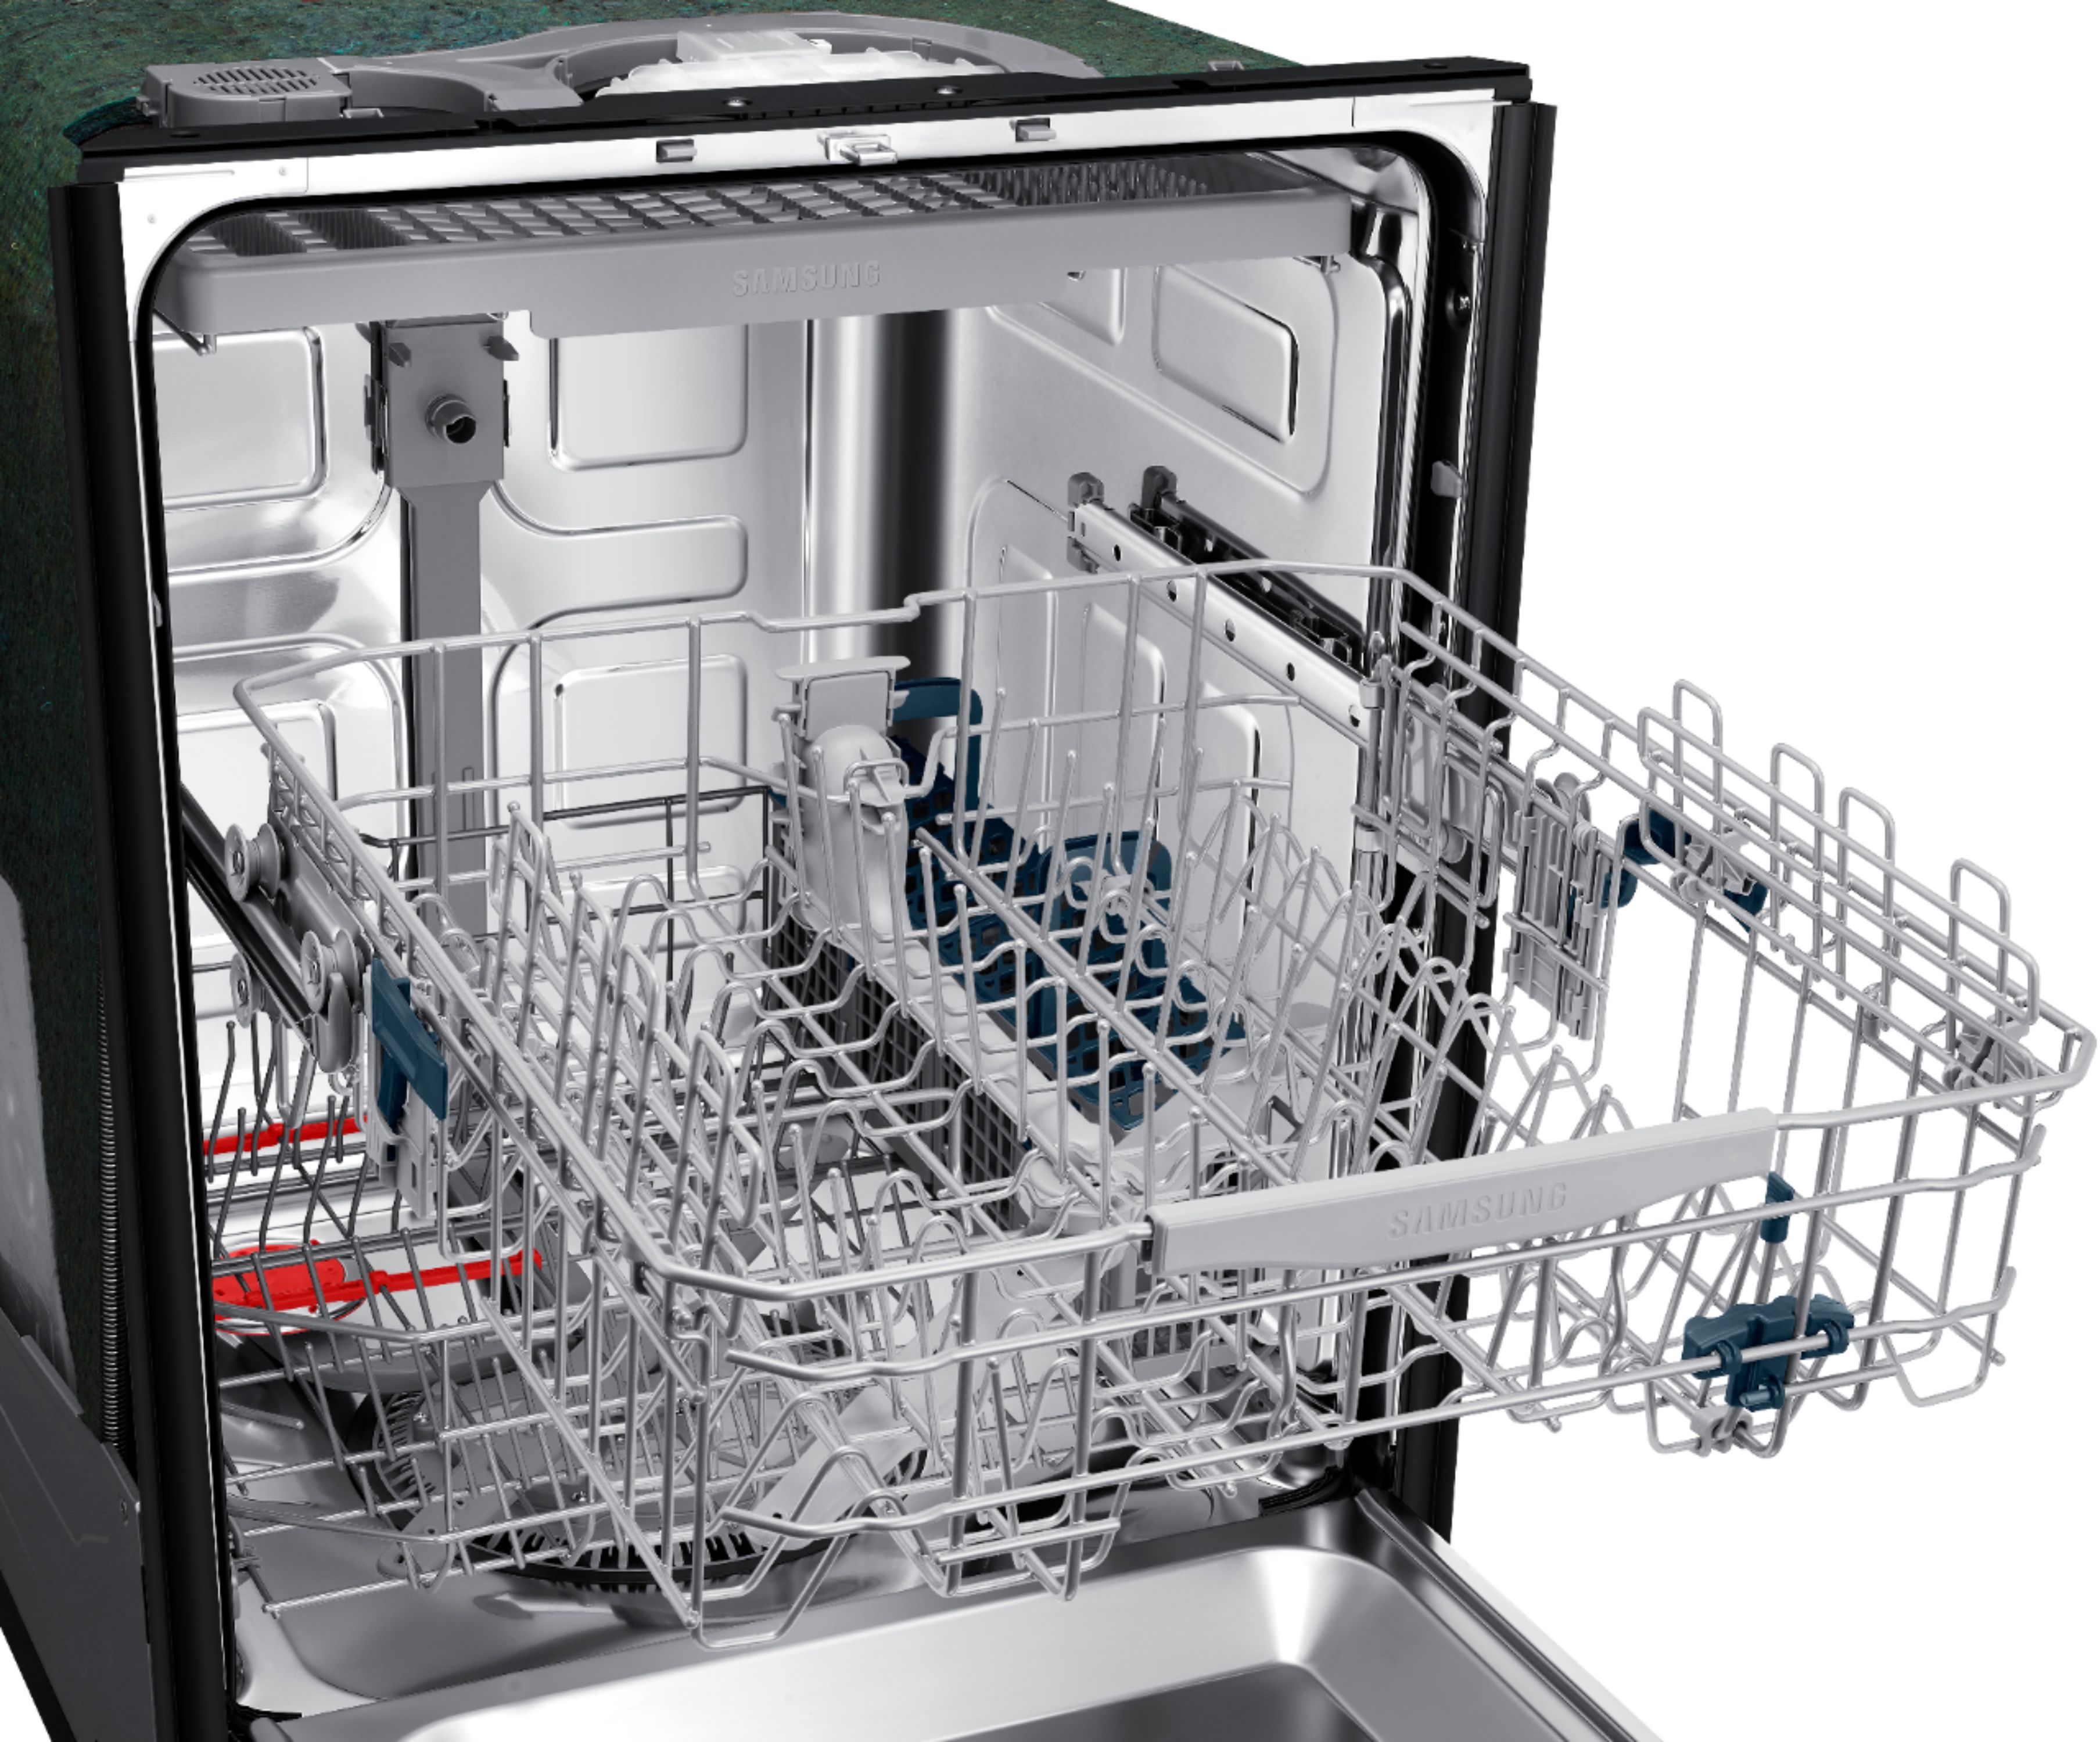 Samsung - StormWash™ 24 Top Control Built-In Dishwasher - Stainless steel  - Discount Appliance & Mattress Outlet Inc